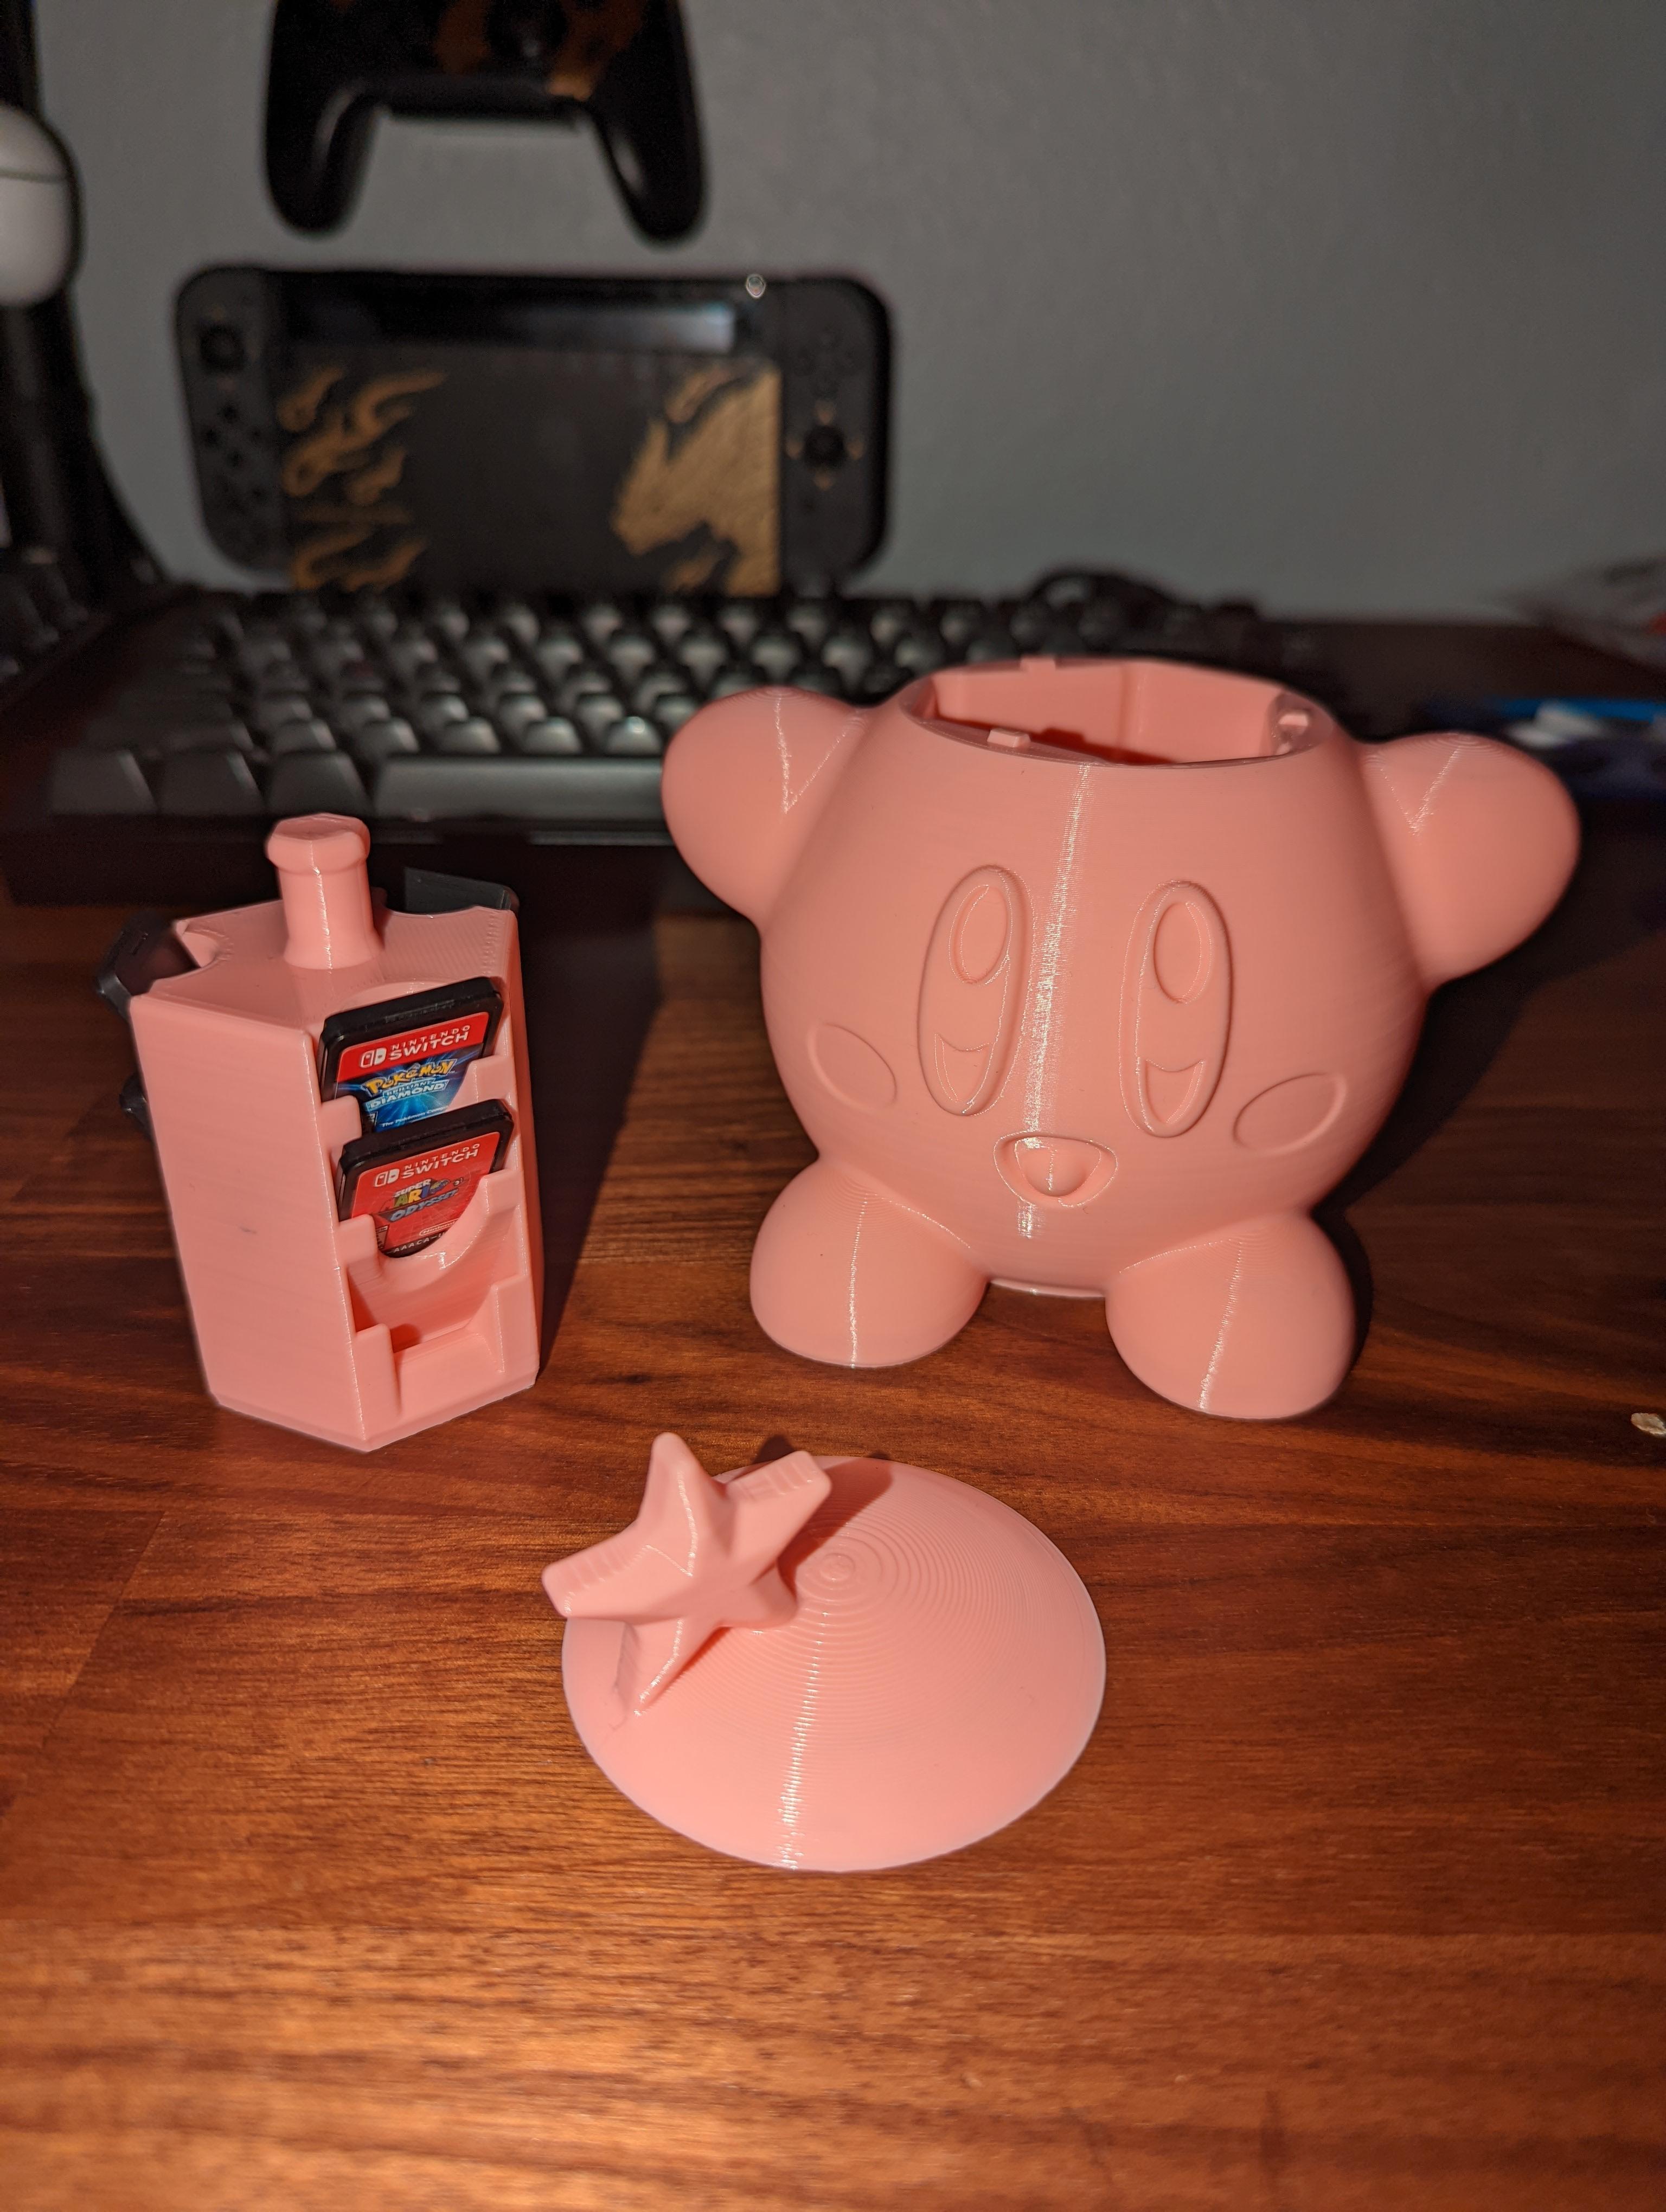 Kirby Switch Cartridge Holder - Cute Nintendo Figure! - I'm new to 3D Printing and this came out great! I plan on painting. - 3d model